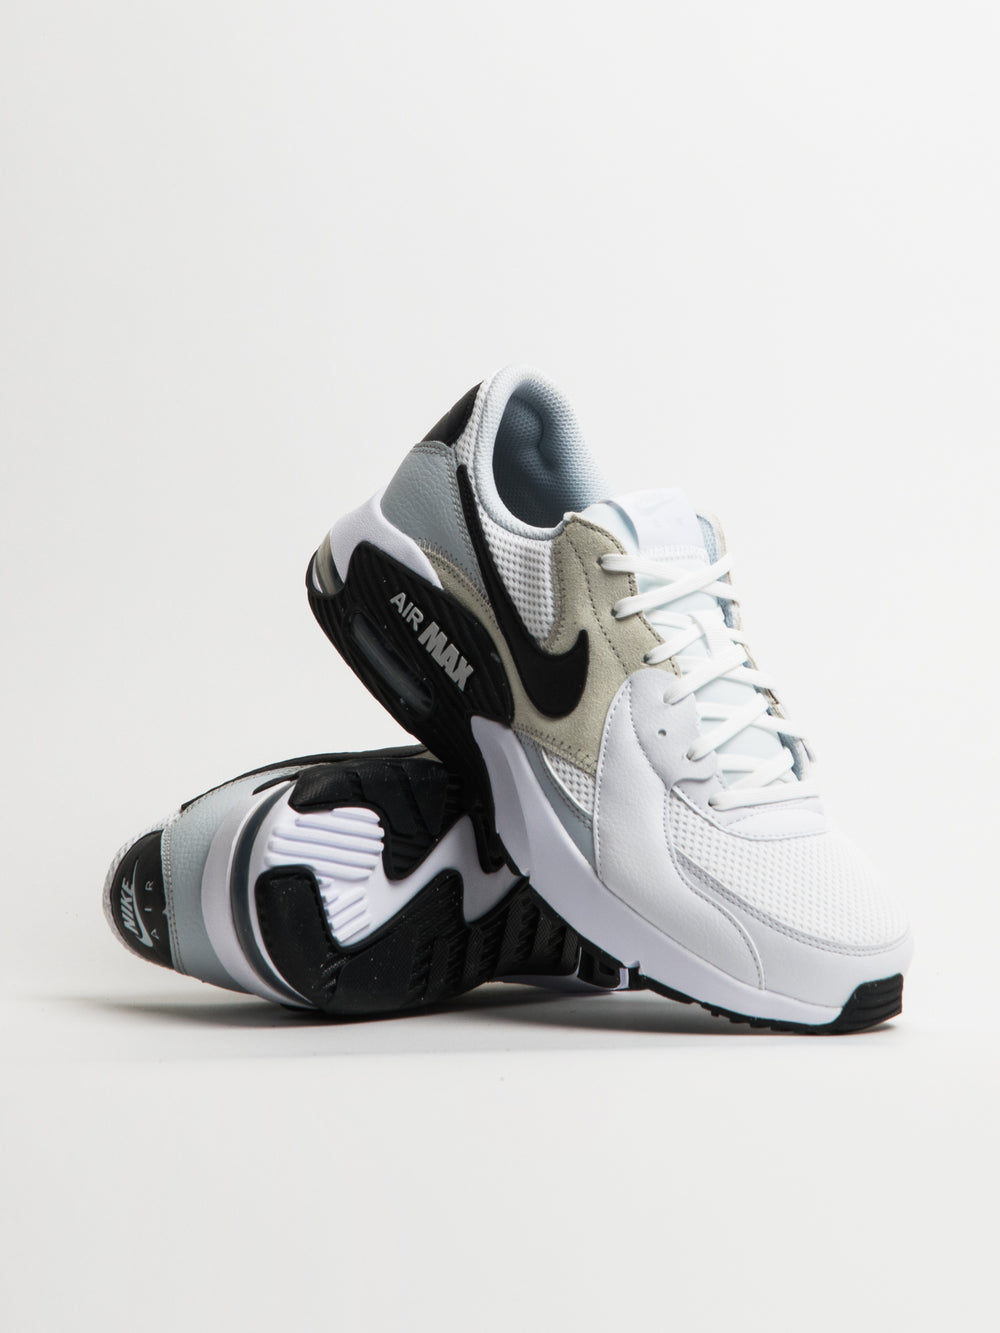 CHAUSSURES DE SPORT NIKE AIR MAX EXCEE POUR HOMMES